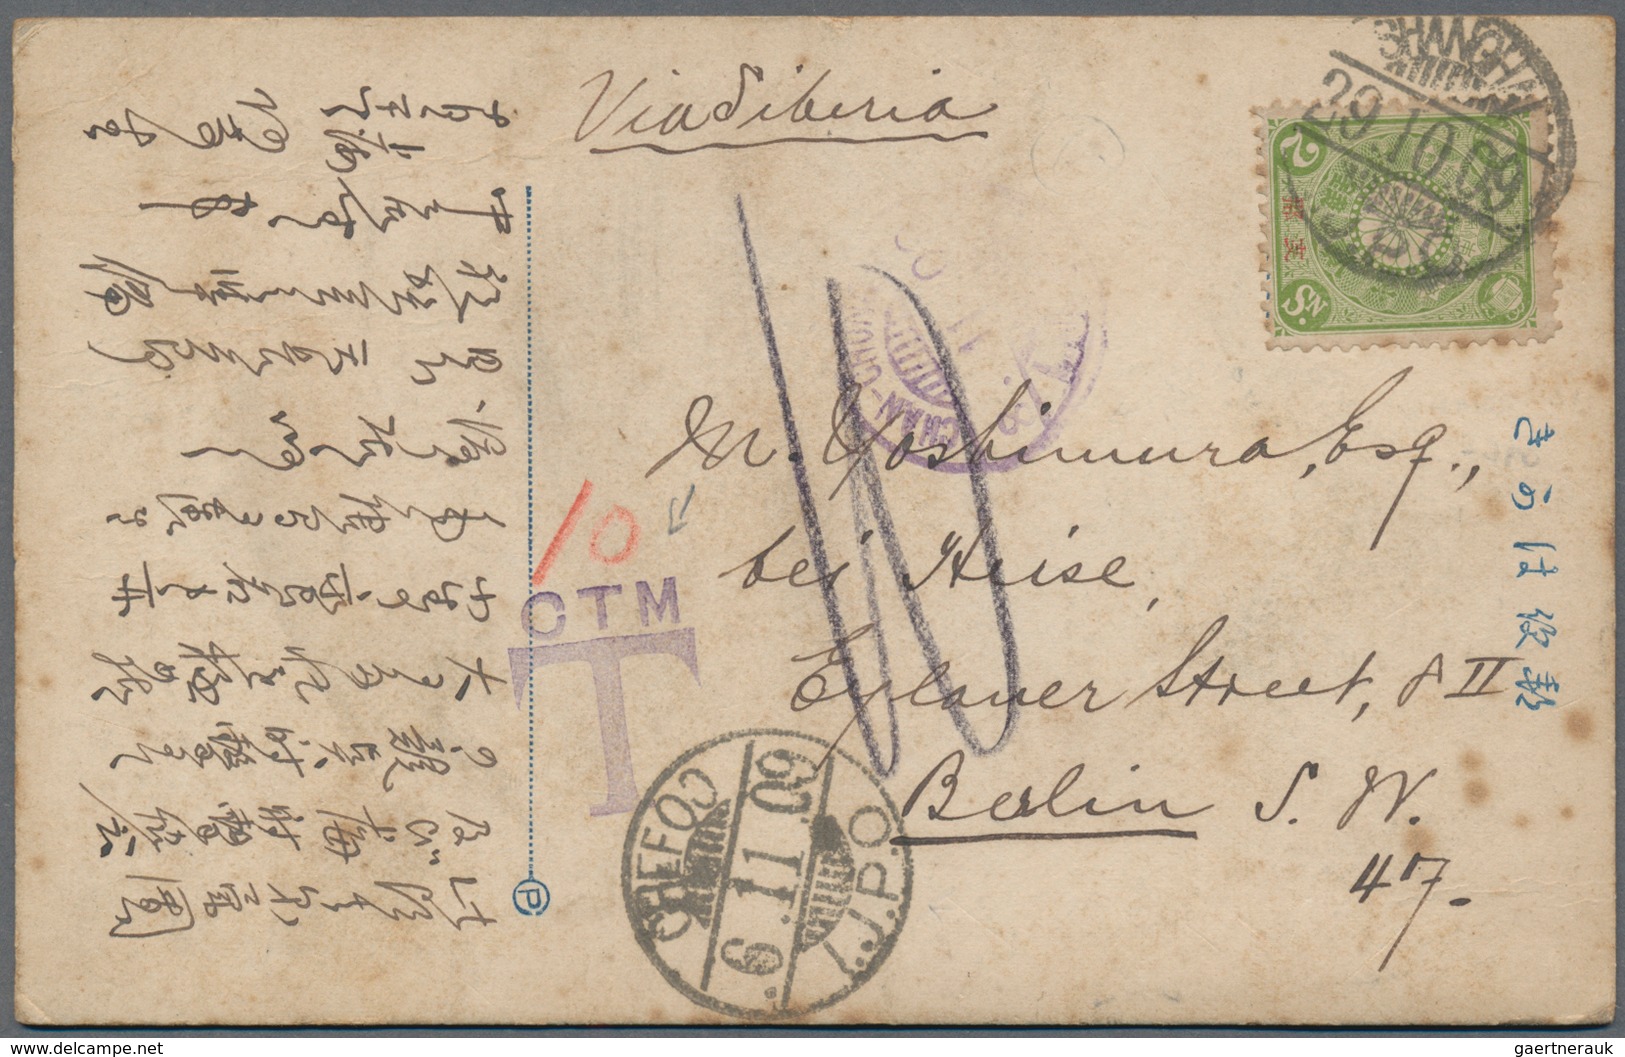 Japanische Post In China: 1900/14, Frankings On Ppc, At The 1 1/2 S. China-Japan Special Rate (3) Or - 1943-45 Shanghai & Nanjing